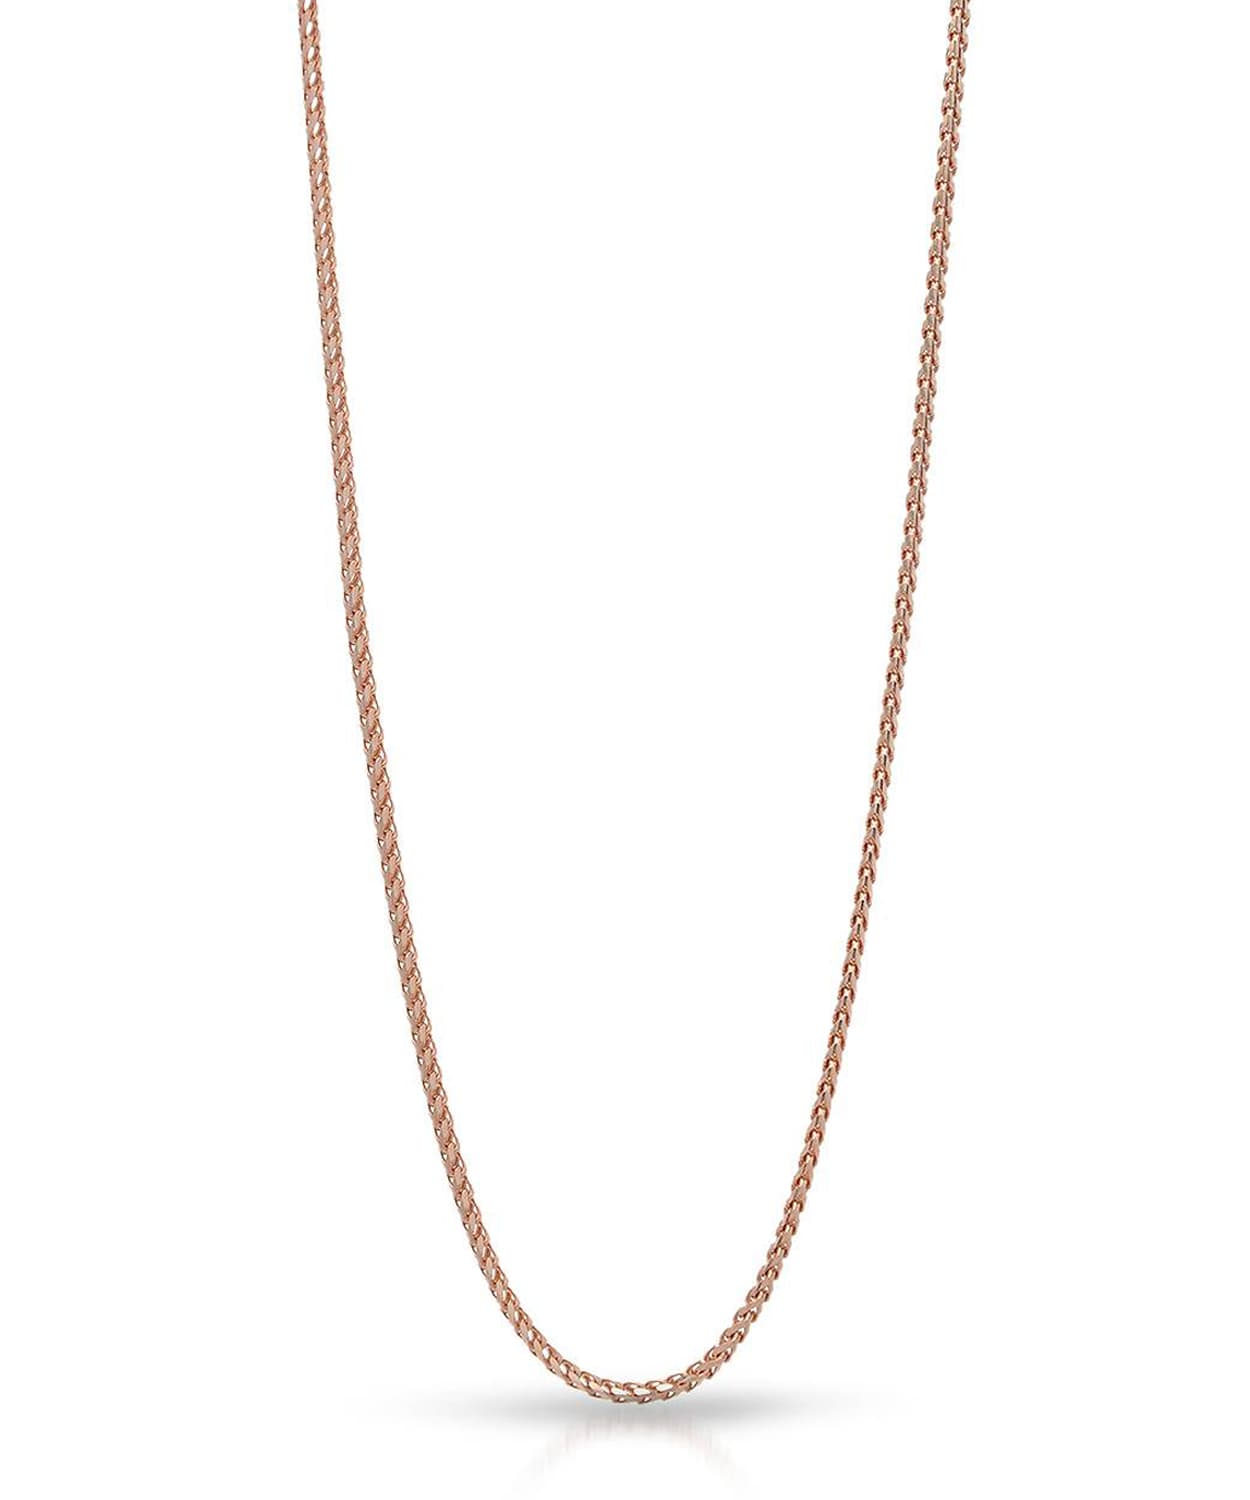 1.1mm 14k Rose Gold Dainty Franco Chain View 1